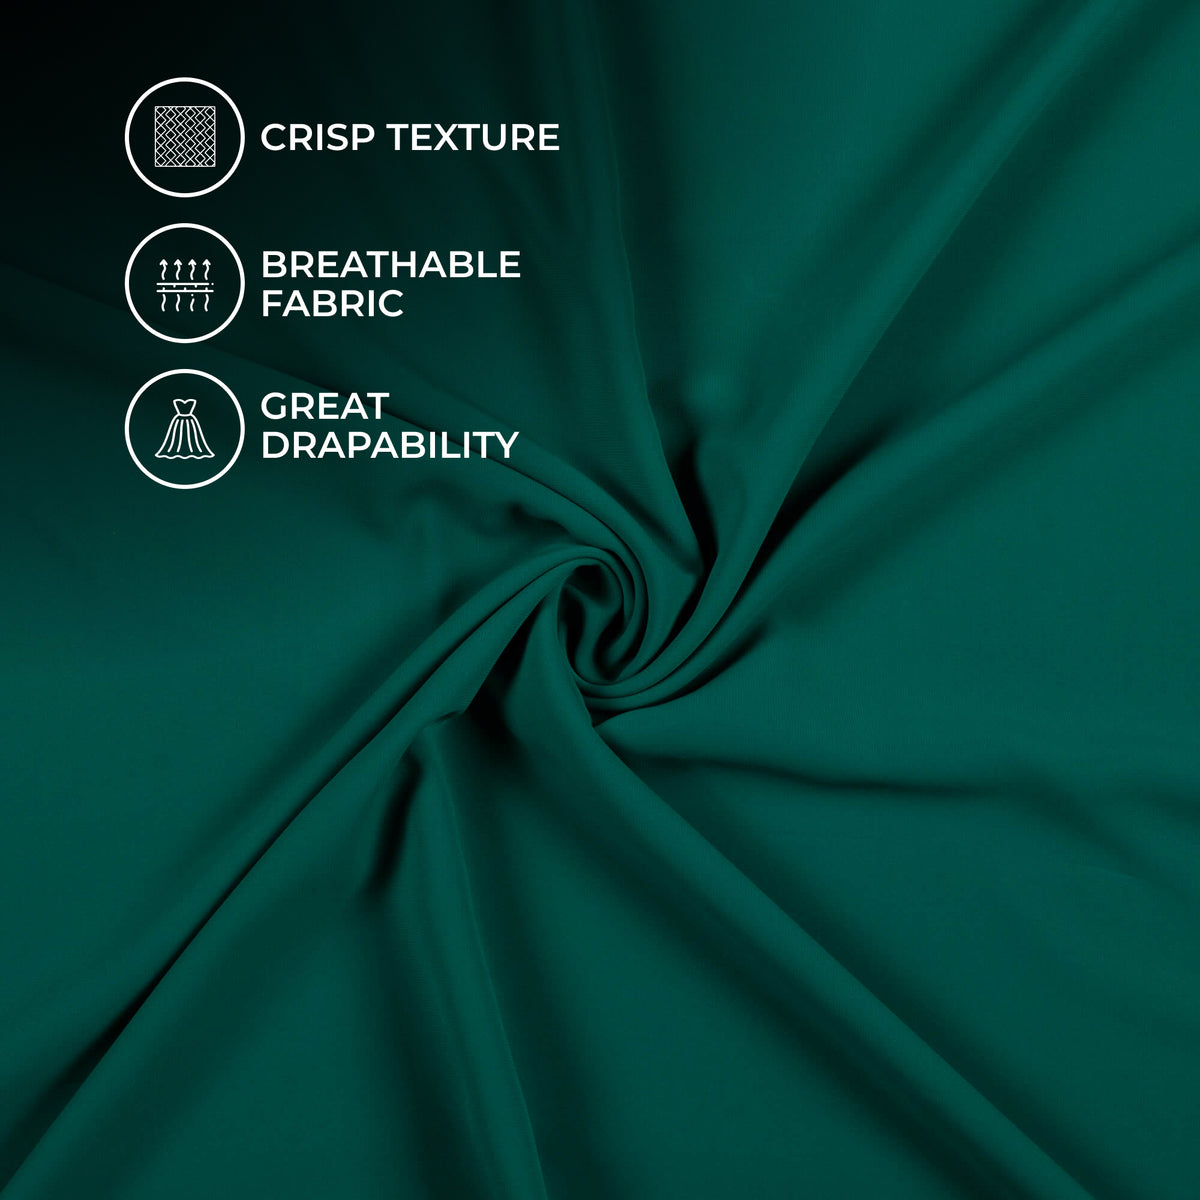 Pine Green Plain Vintage Crepe Fabric (Width 56 Inches)